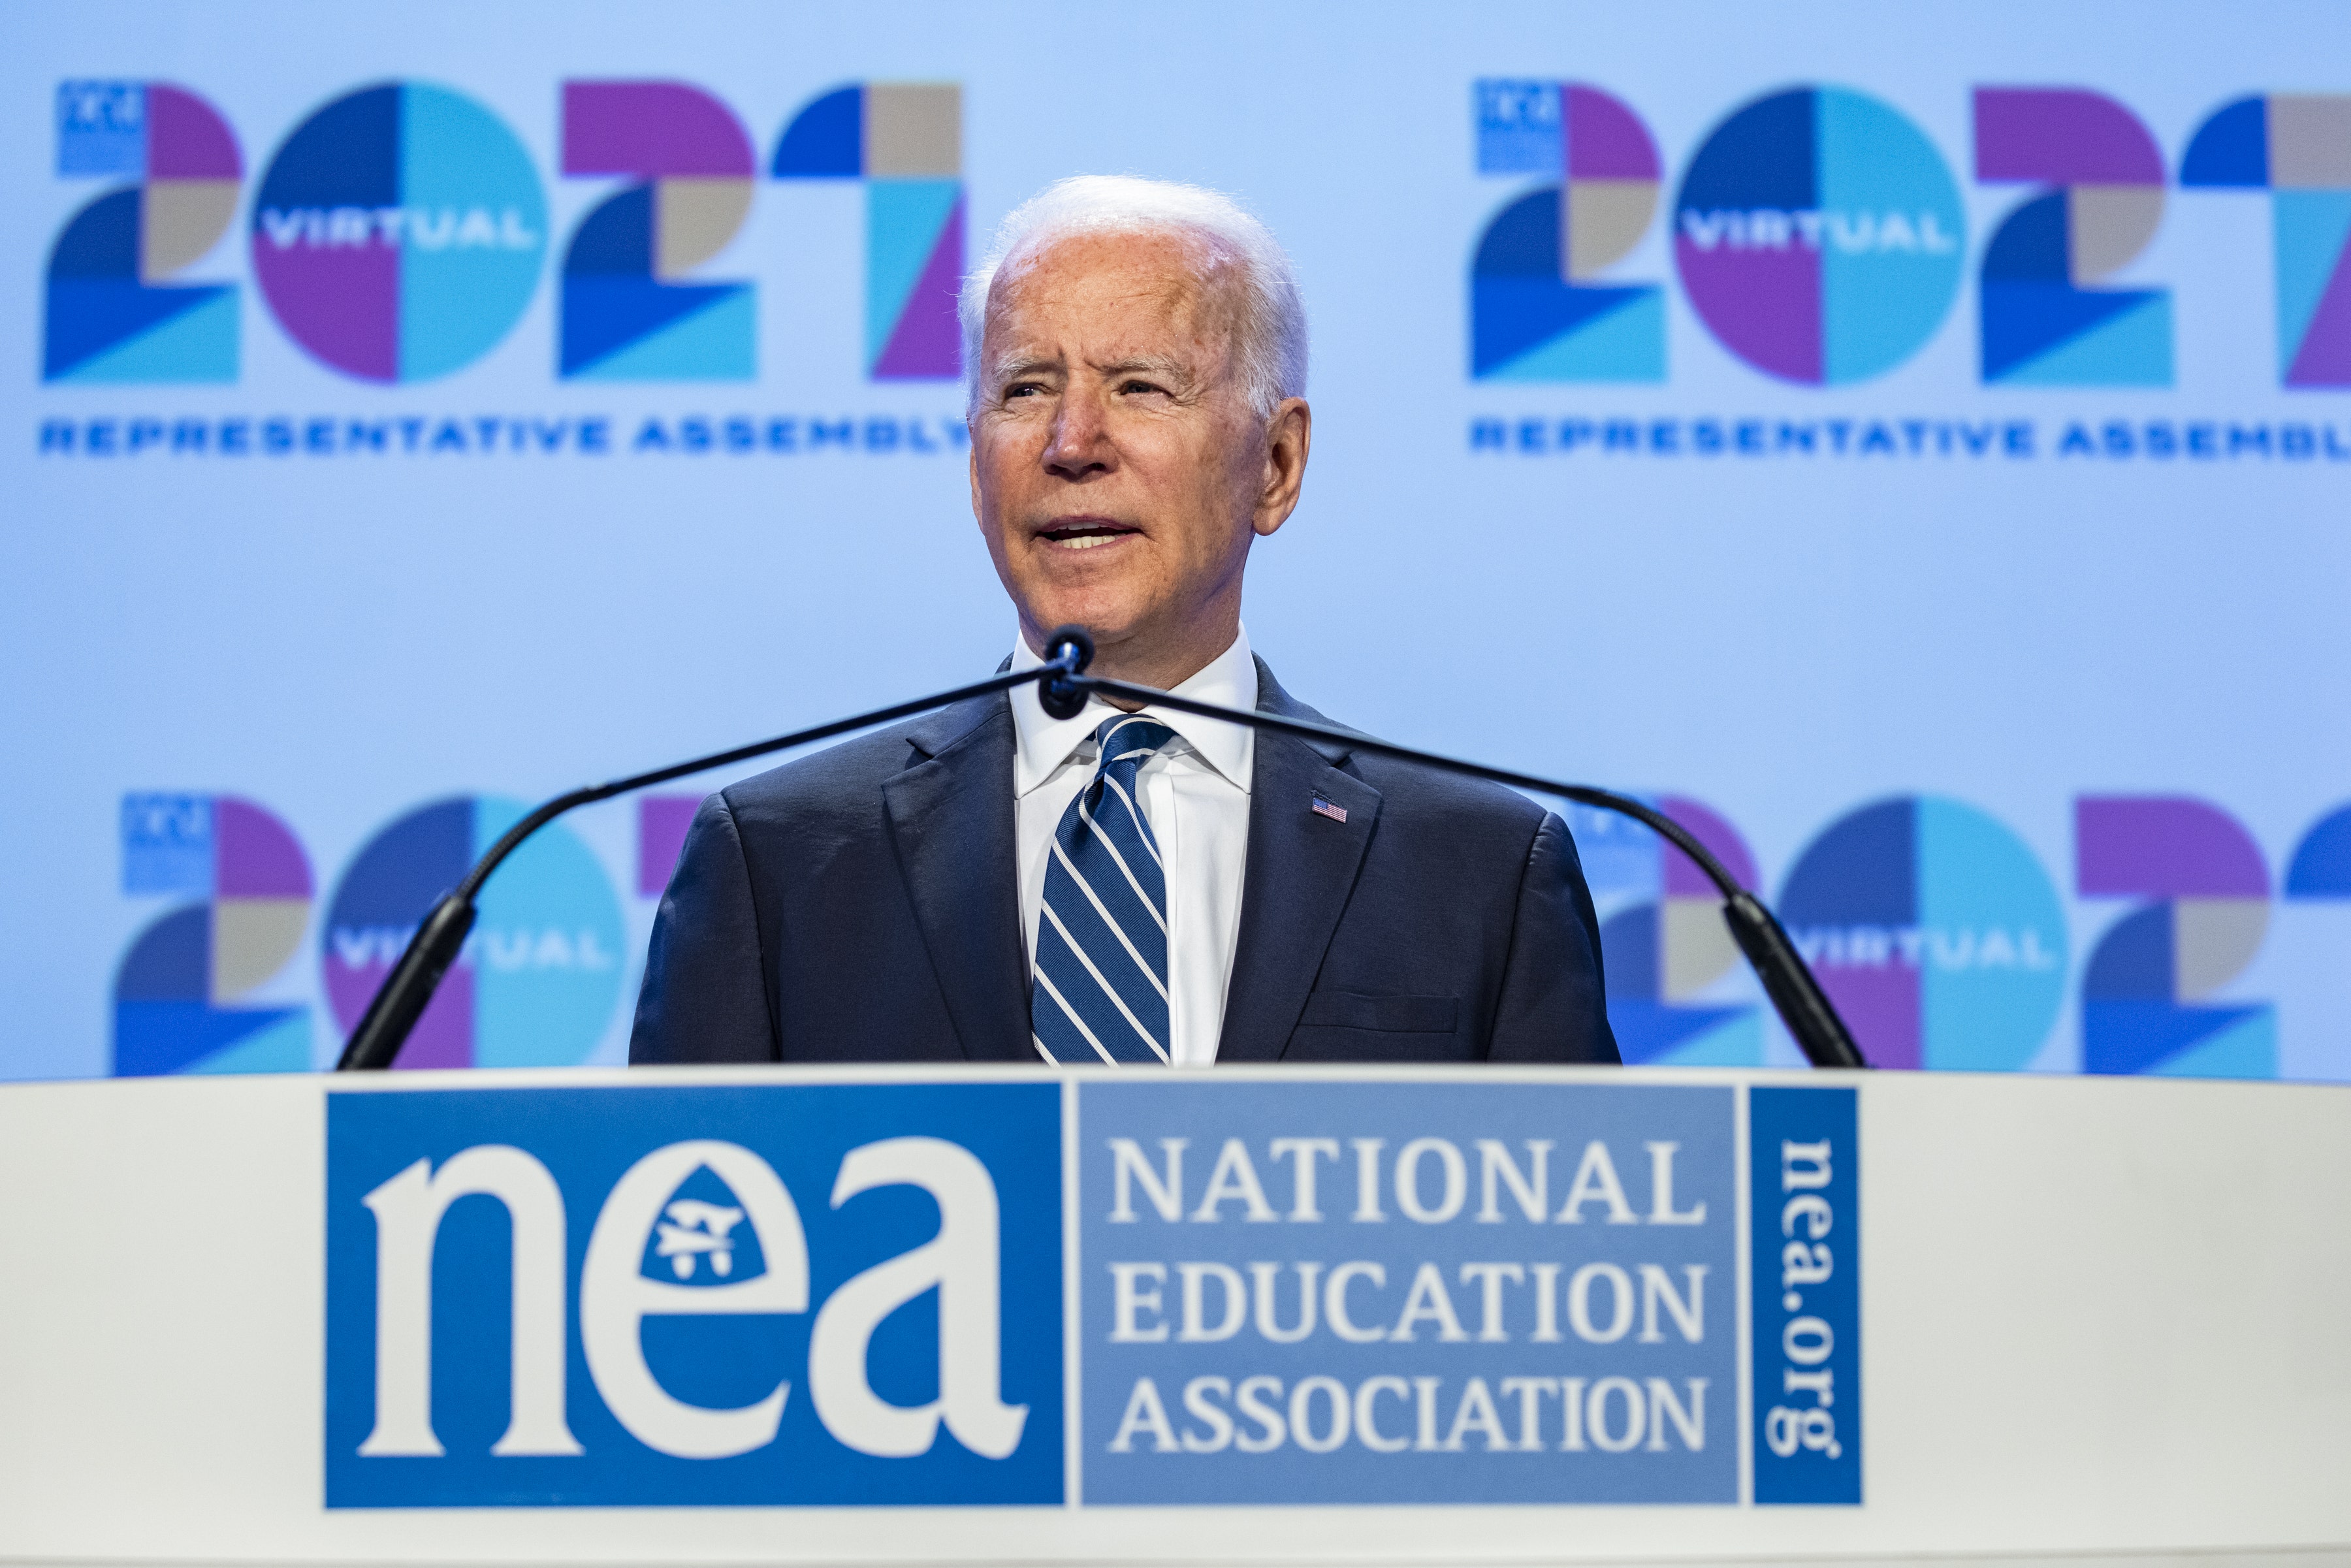 NEA teachers' union where Biden spoke has showered Democrats with political contributions over the years